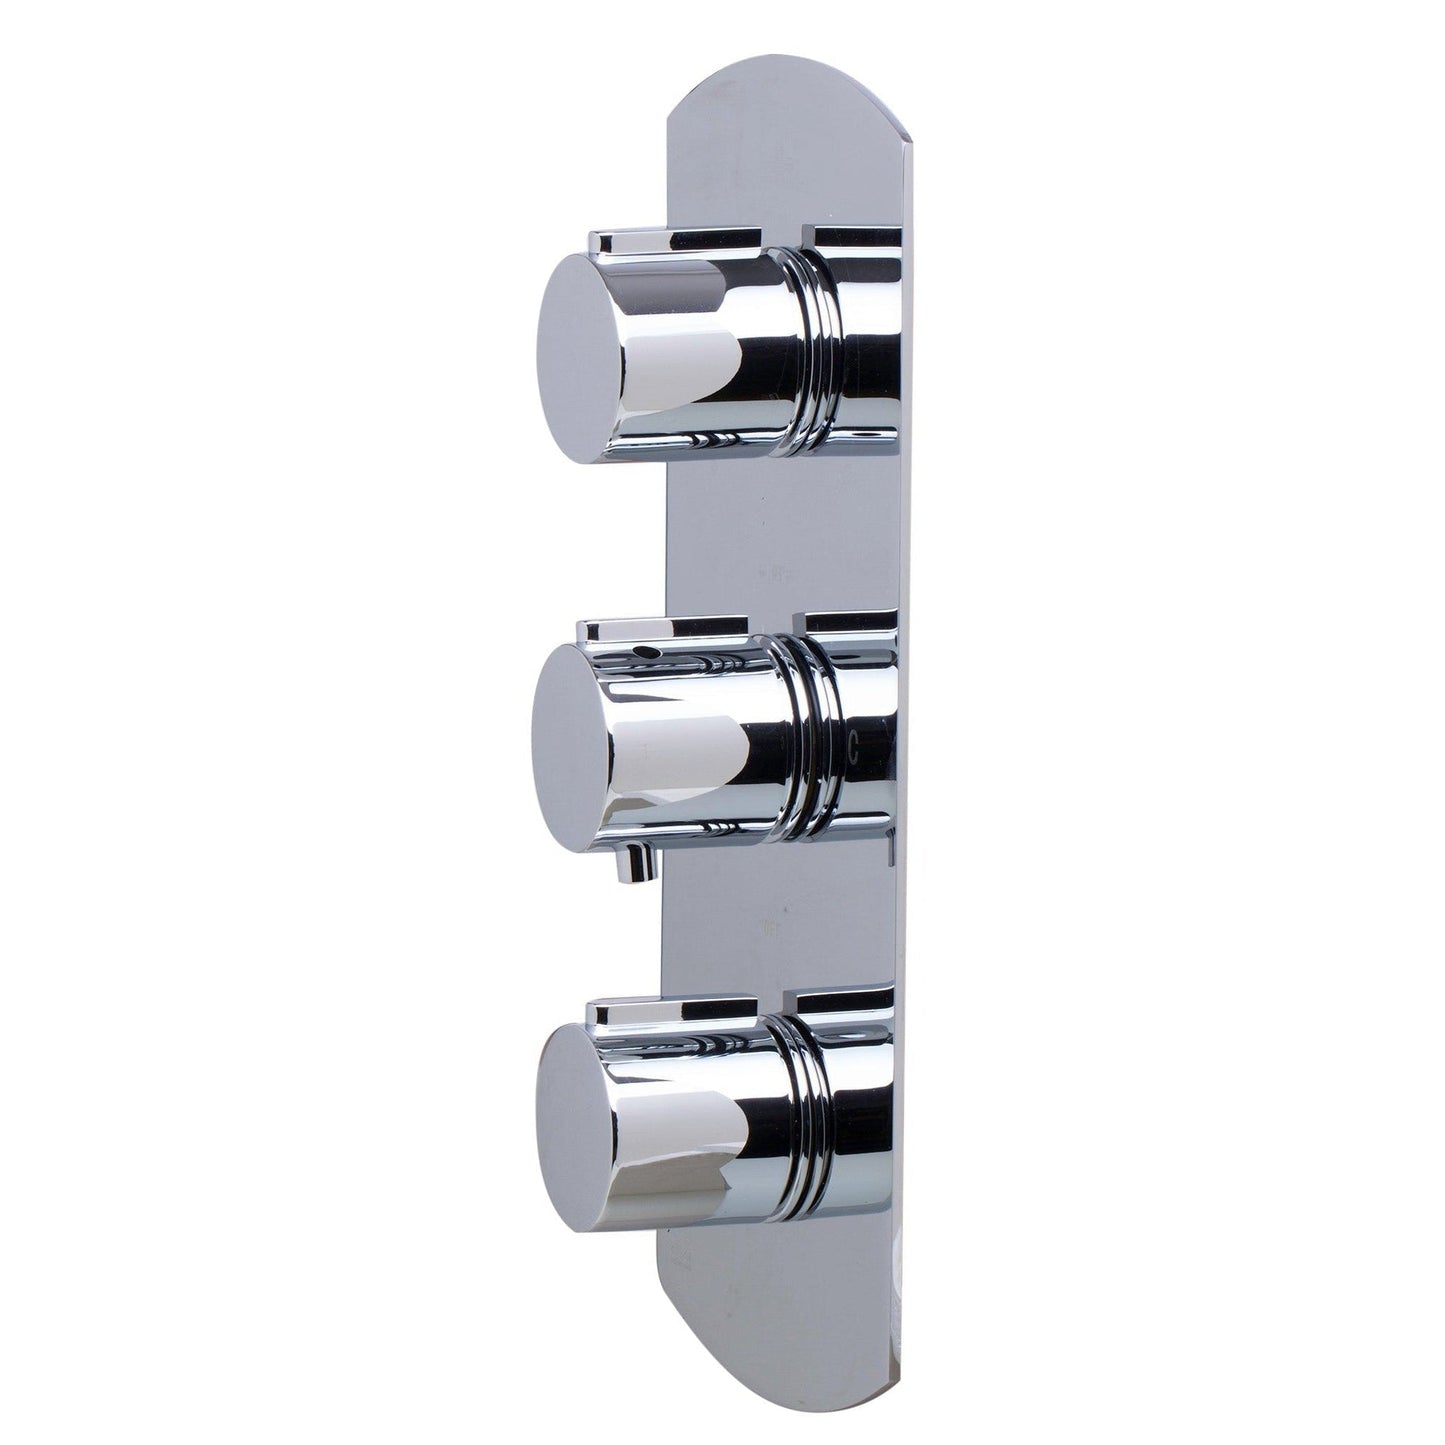 ALFI Brand AB4001-PC Polished Chrome Concealed 3-Way Thermostatic Valve Shower Mixer With Round Knobs